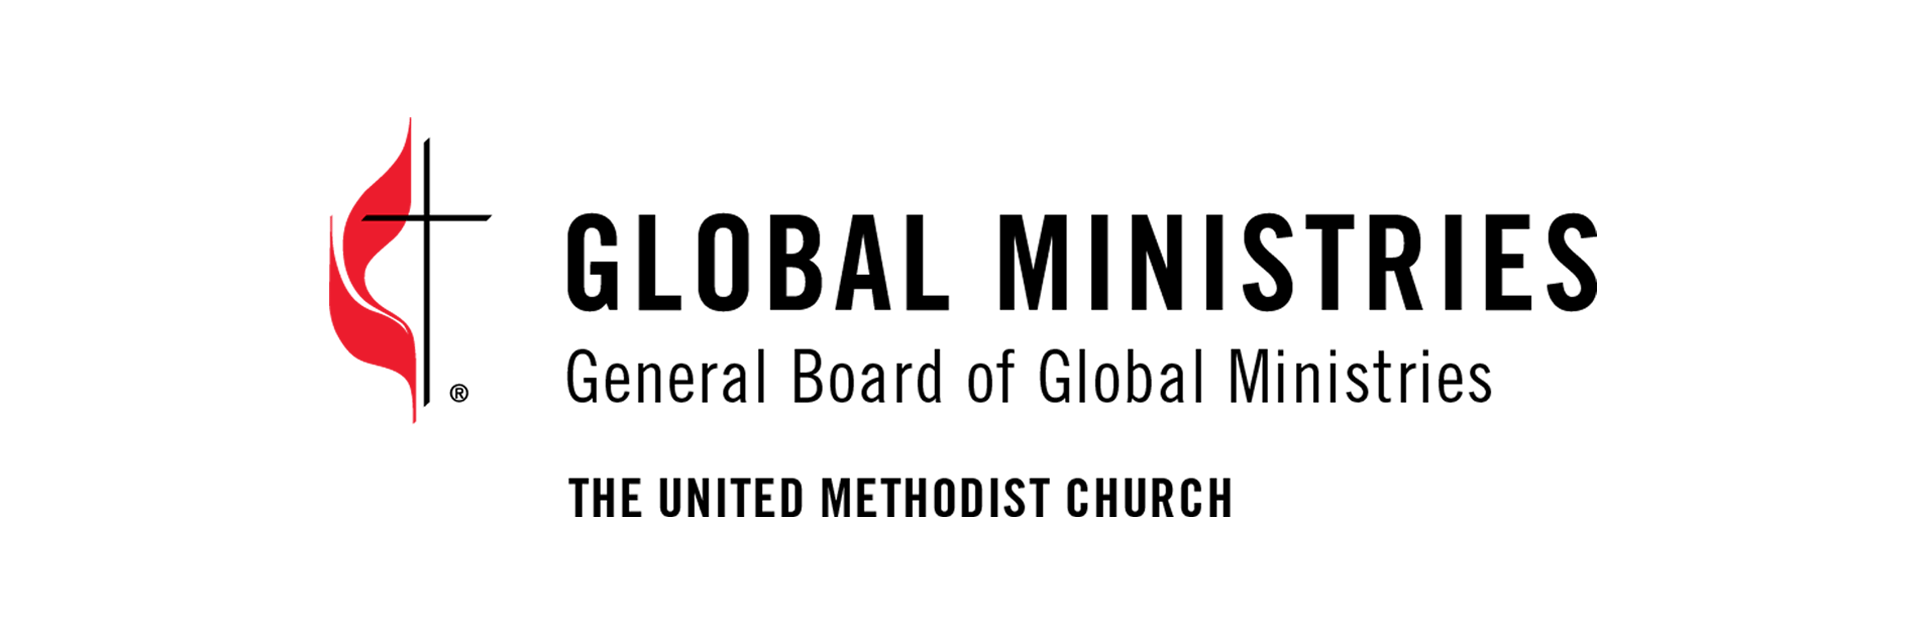 Global Ministries is a Gold Tier Sponsor of the livestream for the postponed 2020 General Conference.